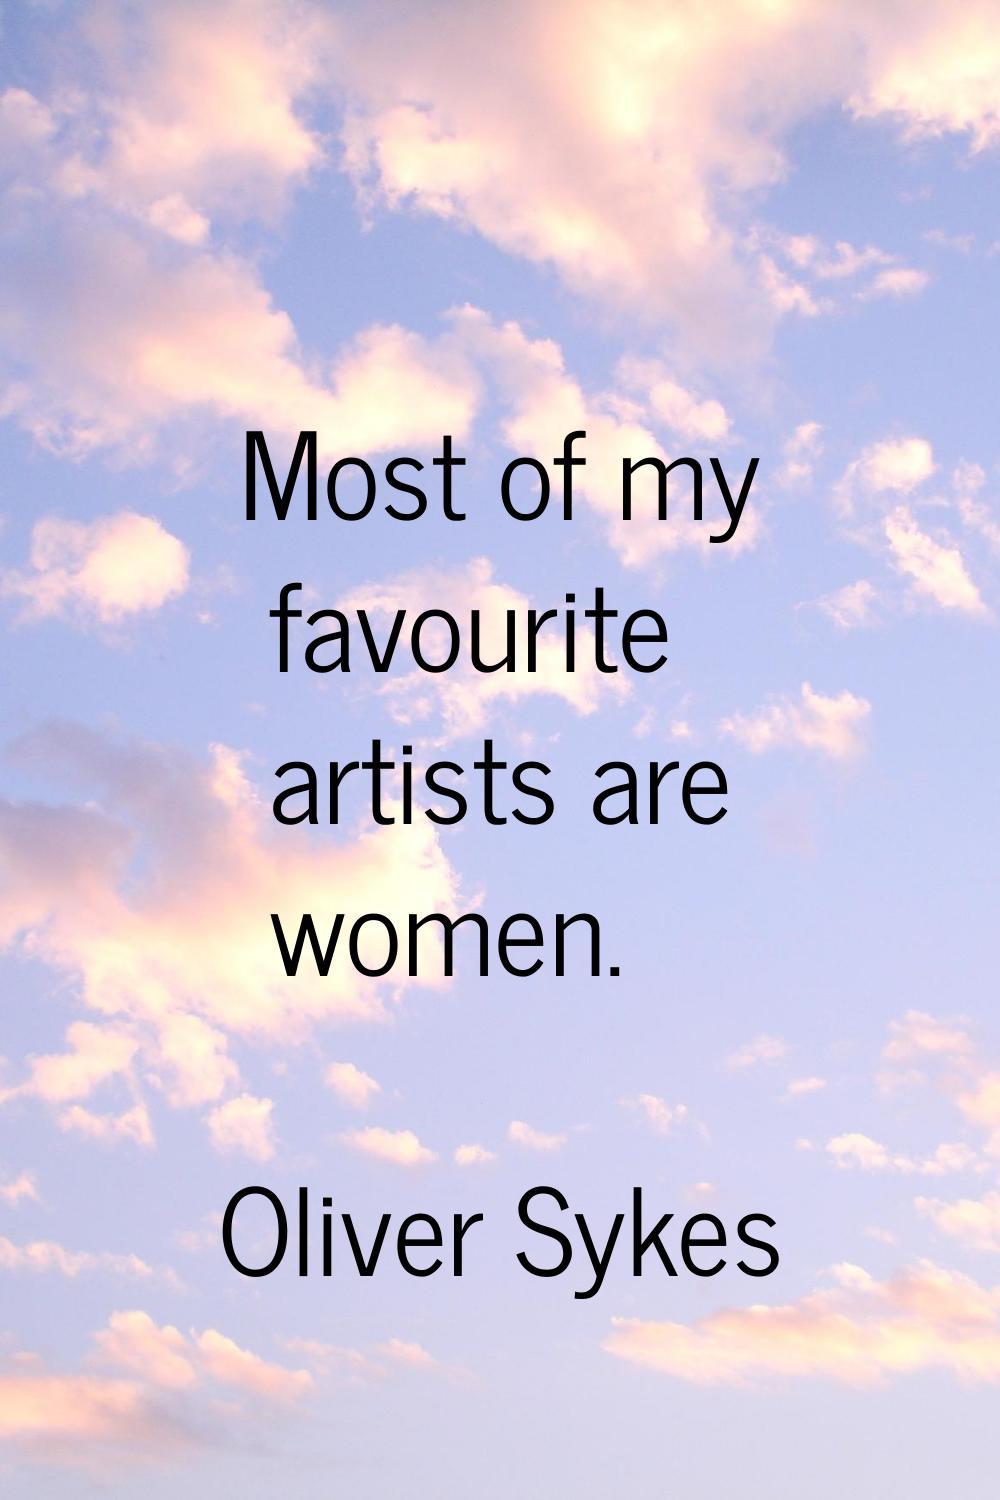 Most of my favourite artists are women.